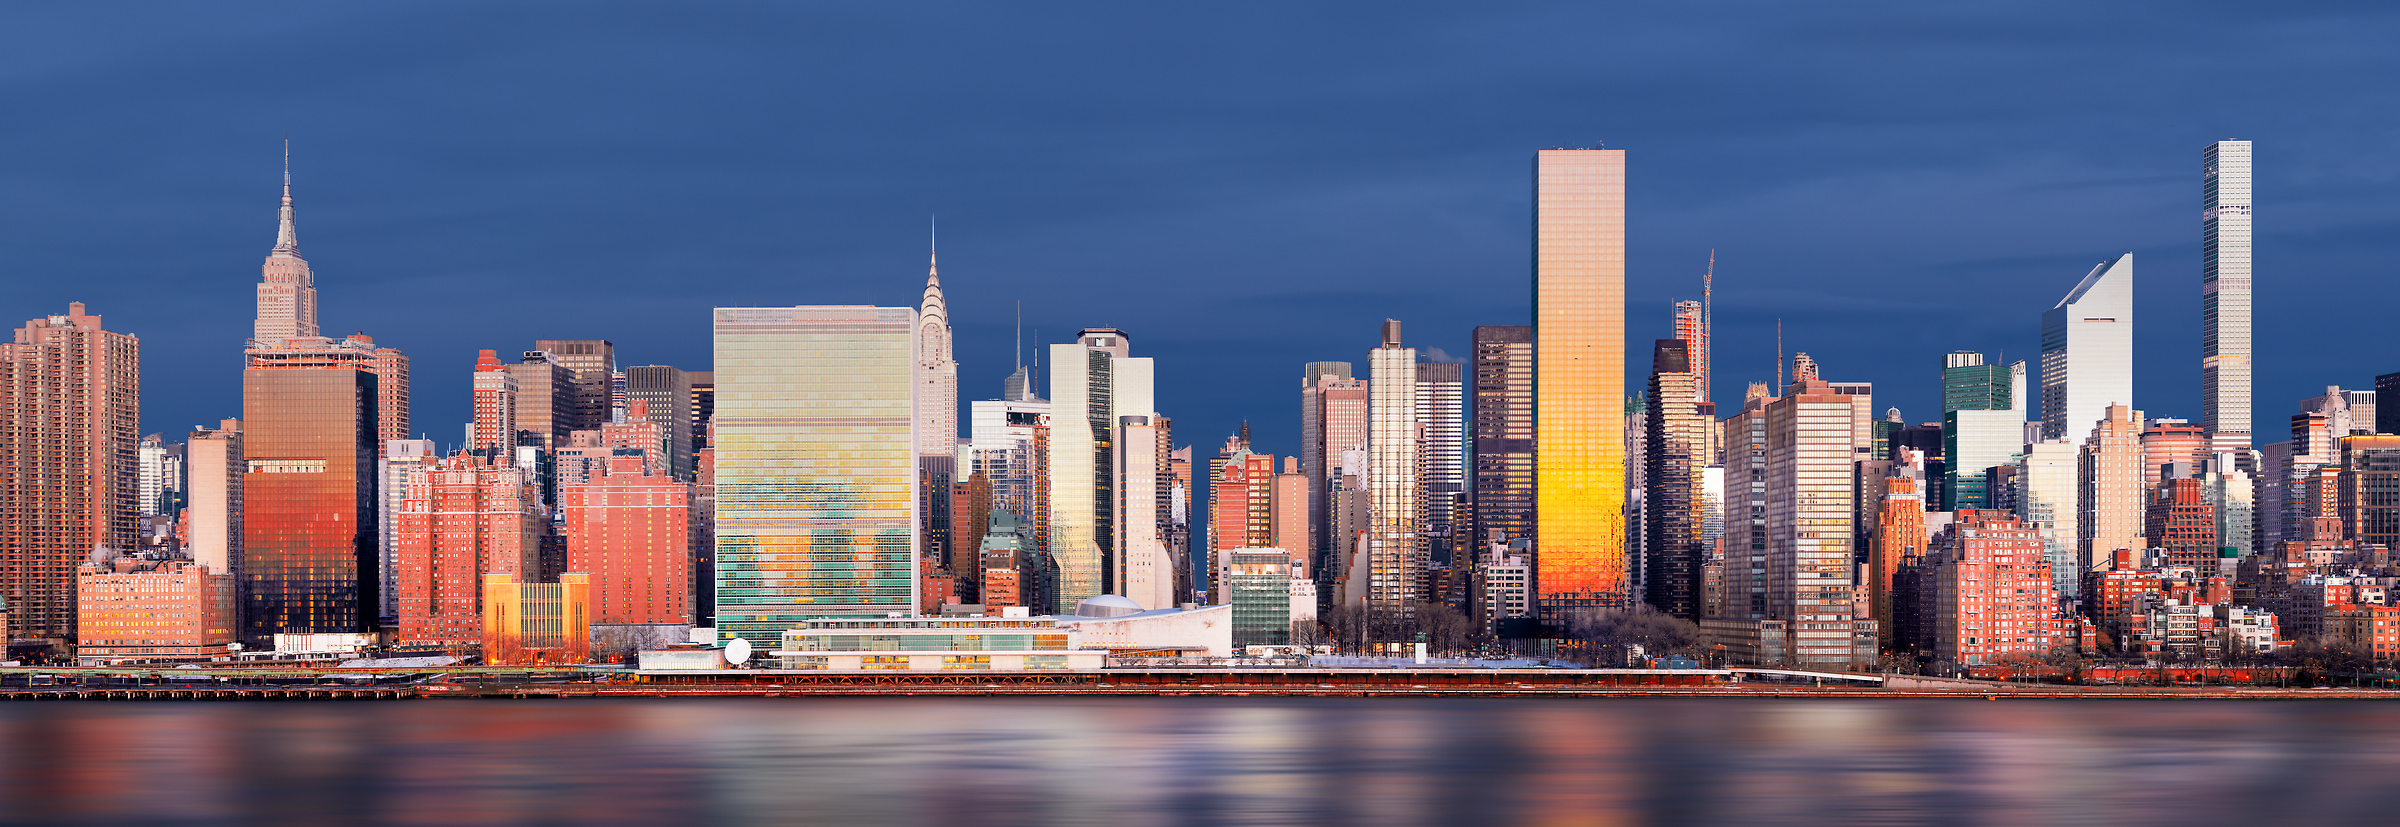 986 megapixels! A very high resolution, large-format VAST photo of the New York City skyline; gigapixel photograph created by Dan Piech in Manhattan